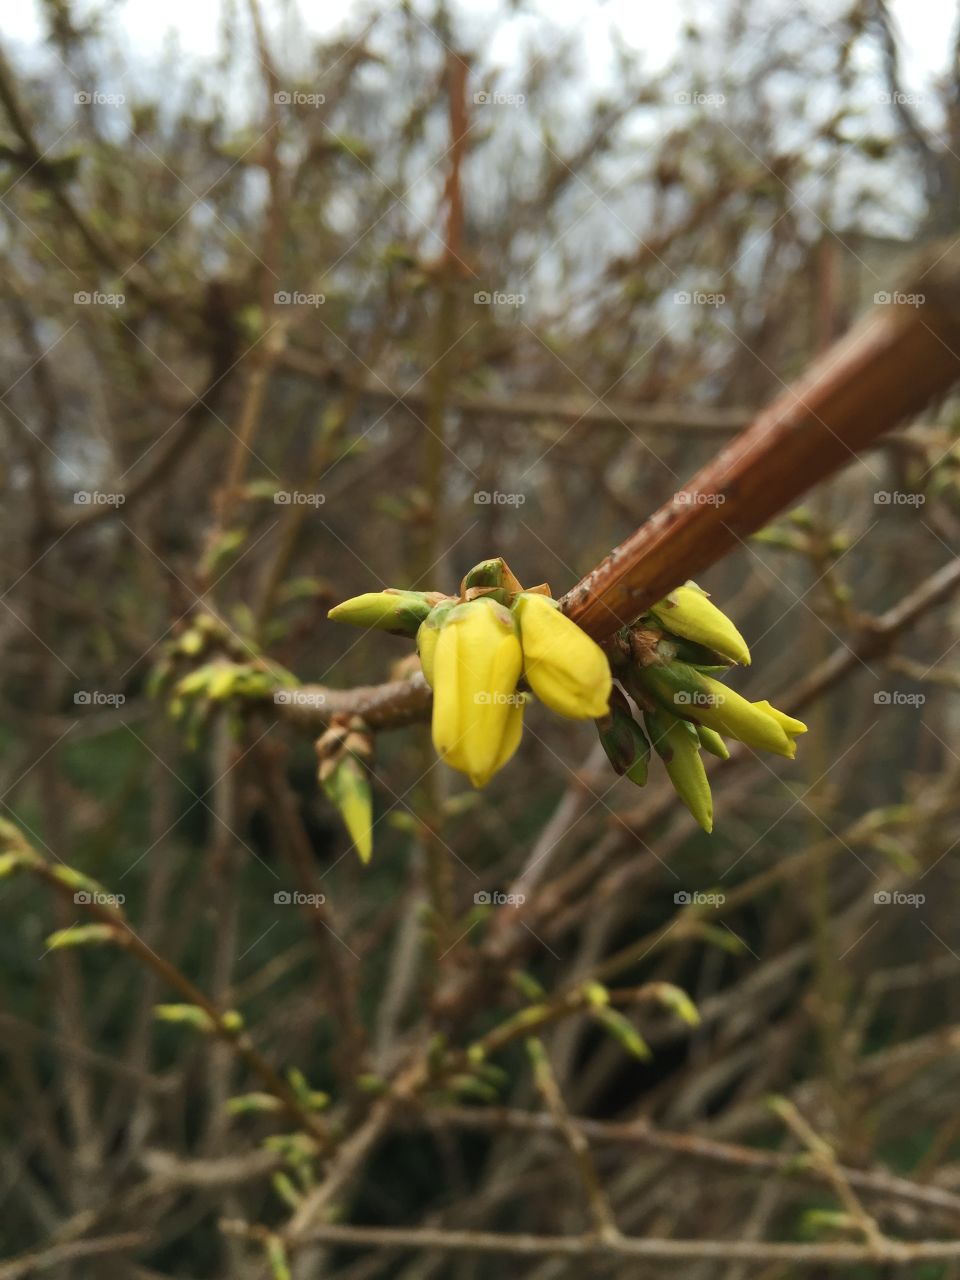 A yellow bud on a small tree that got transplanted in my yard. Extra happy that this is coming out because it makes me hopeful the little tree will make it.